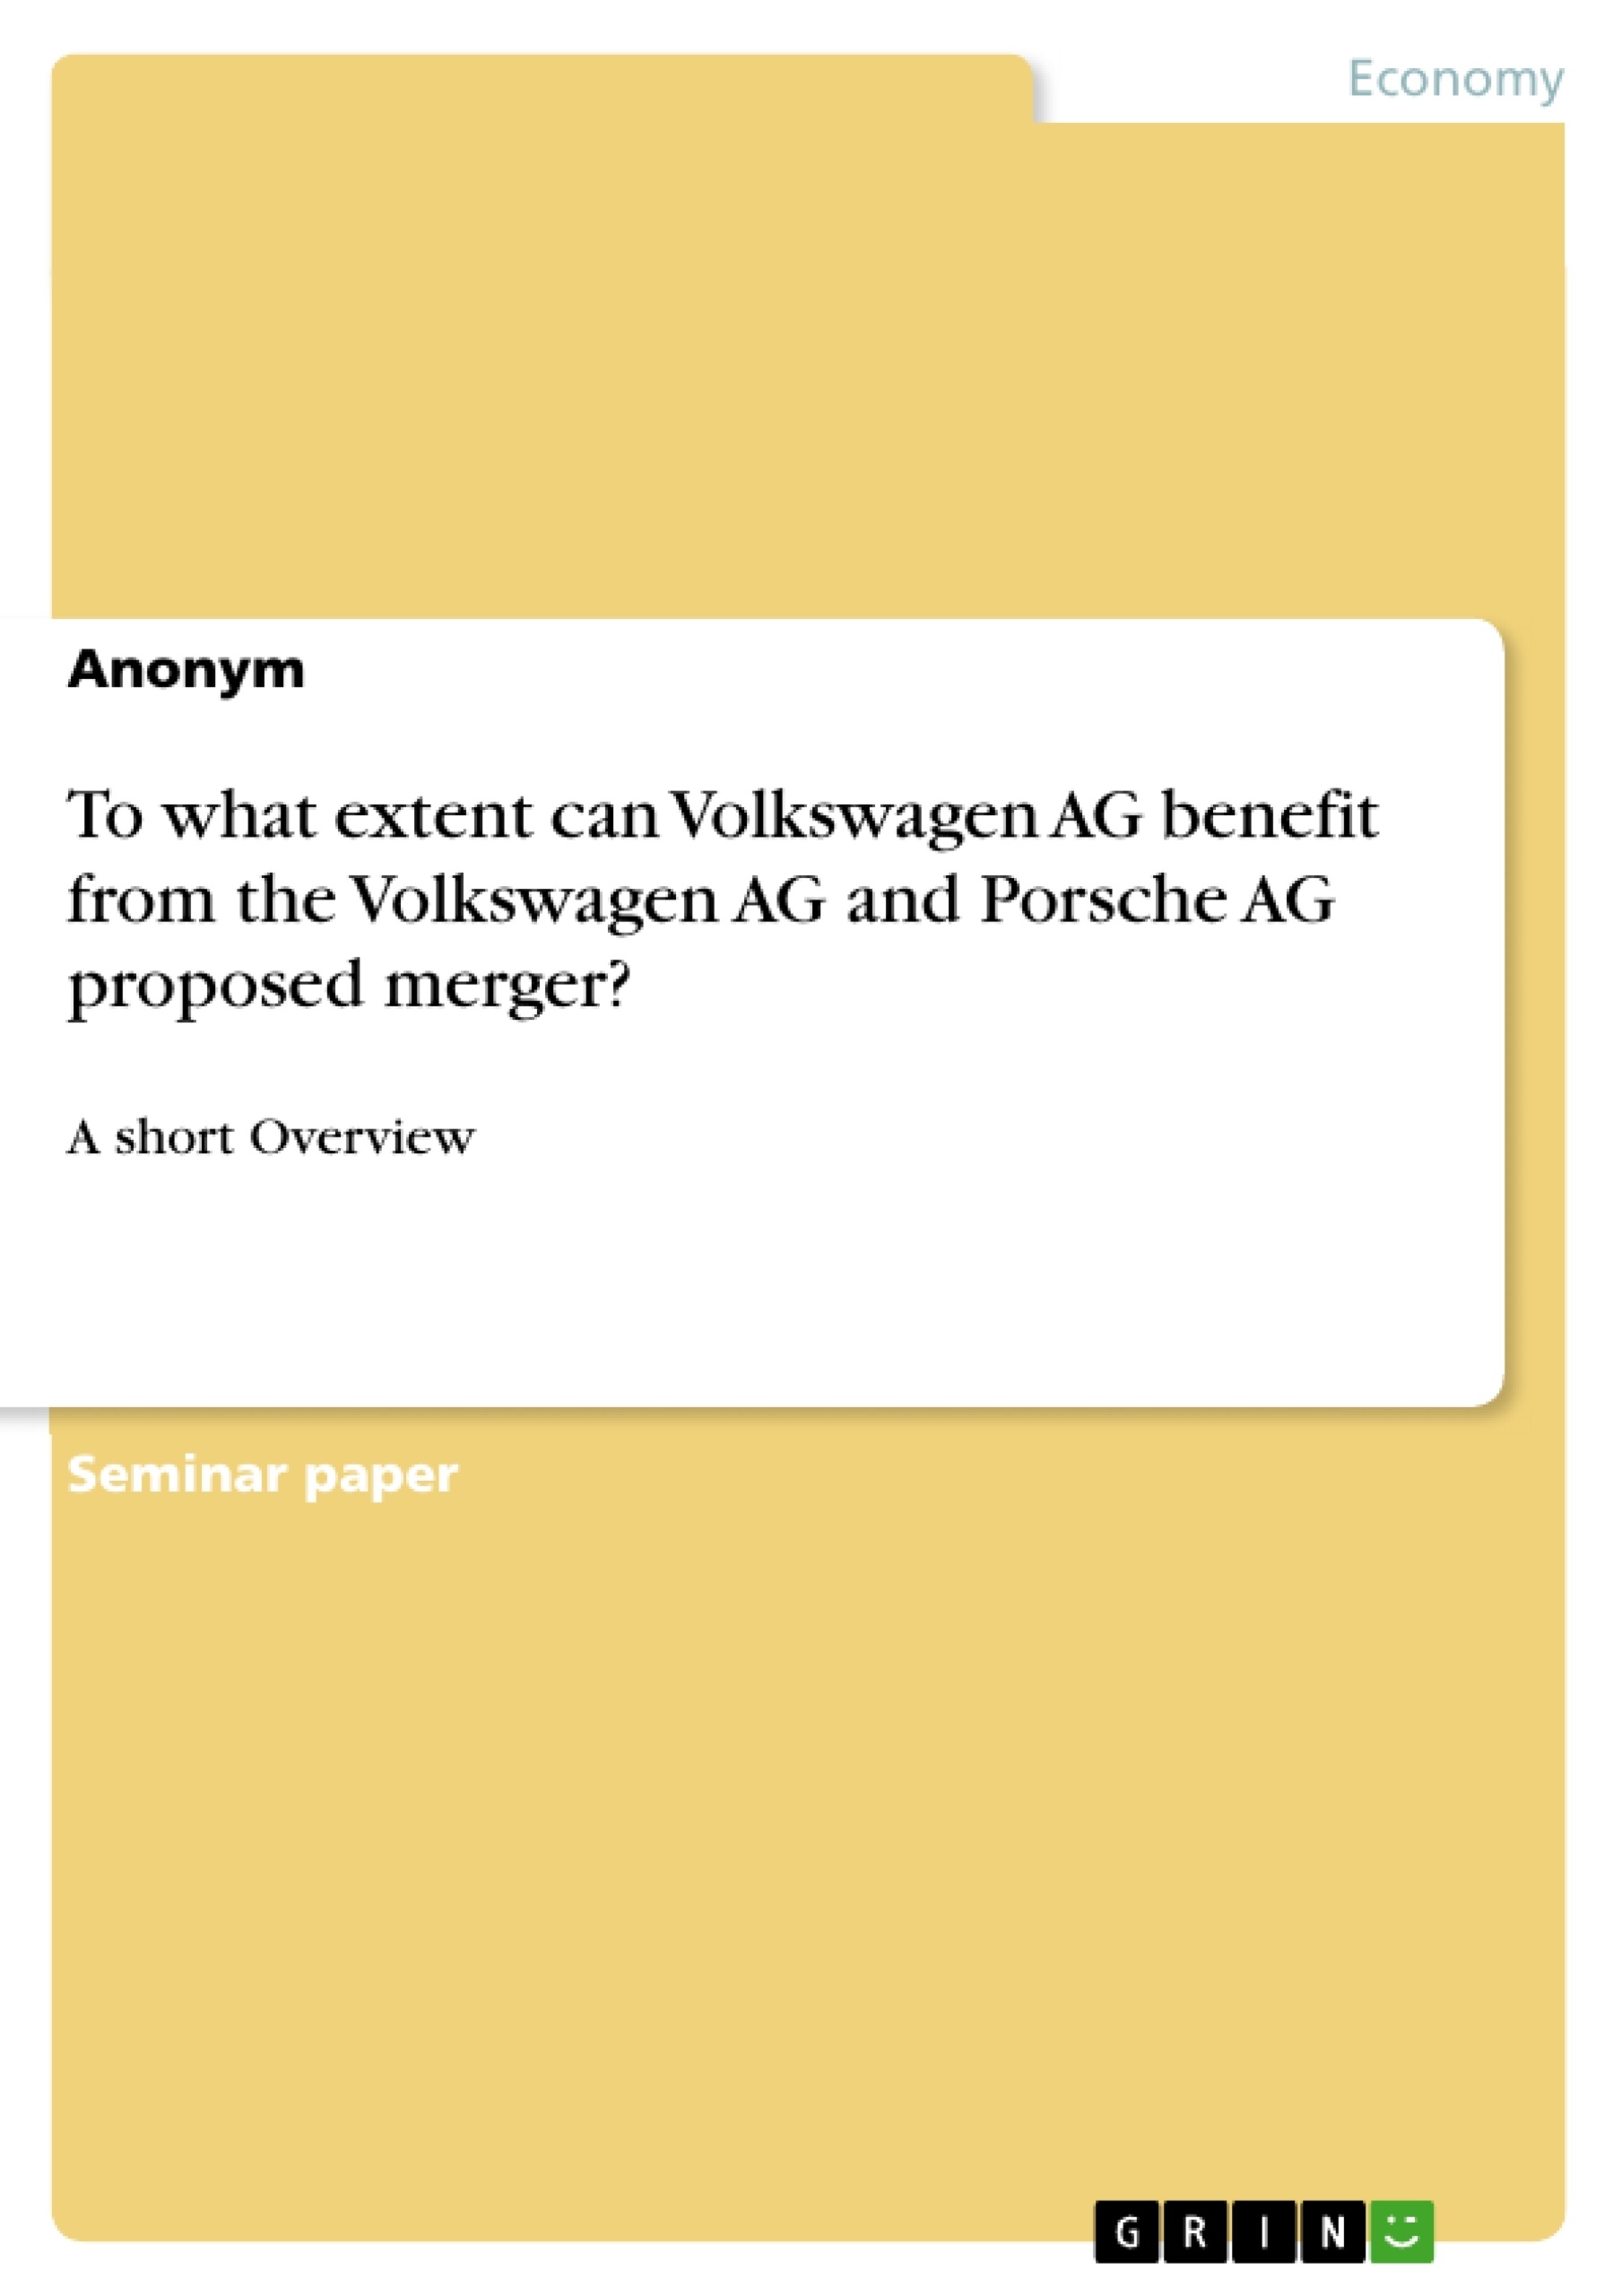 Título: To what extent can Volkswagen AG benefit from the Volkswagen AG and Porsche AG proposed merger?